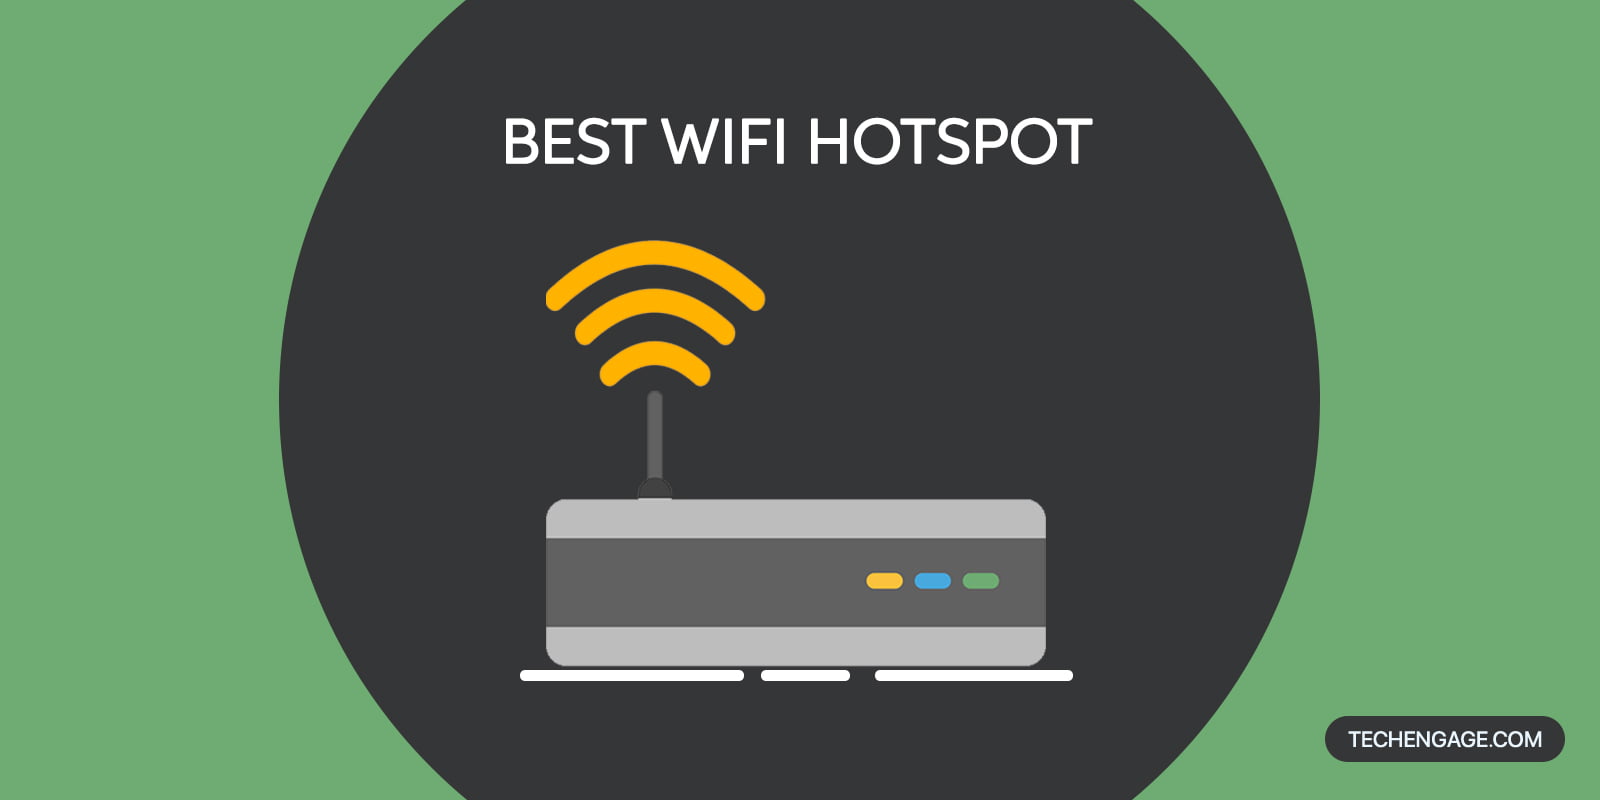 8 Best Mobile Wi-Fi Hotspots For 2023